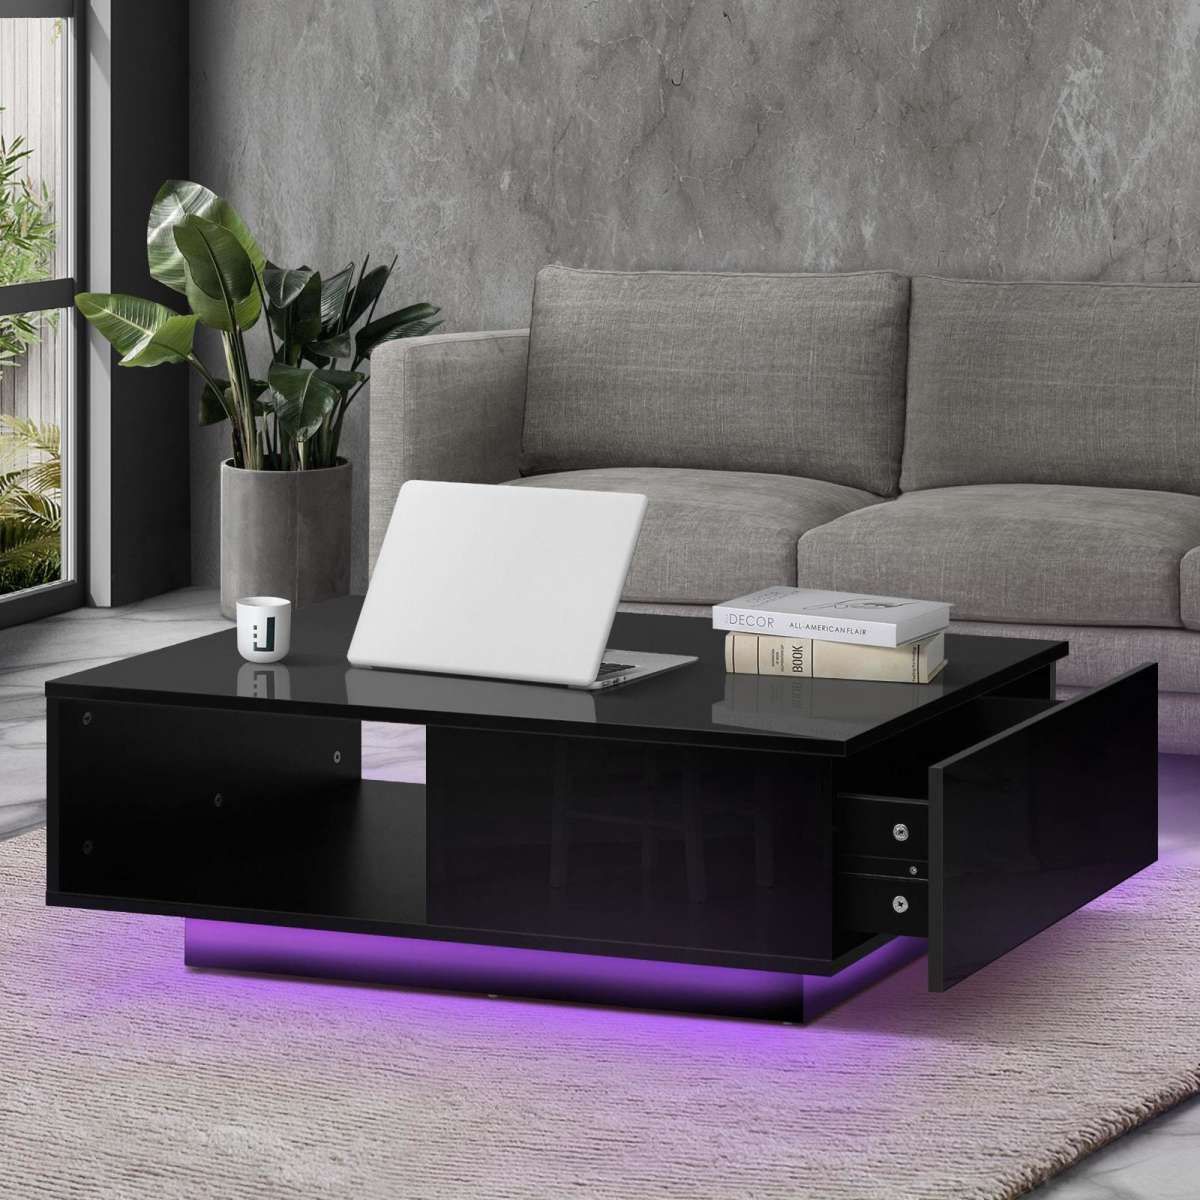 Oikiture Coffee Table Led Light High Gloss Storage Drawer Modern Furniture  Black 1ea | Woolworths Throughout High Gloss Black Coffee Tables (View 11 of 15)